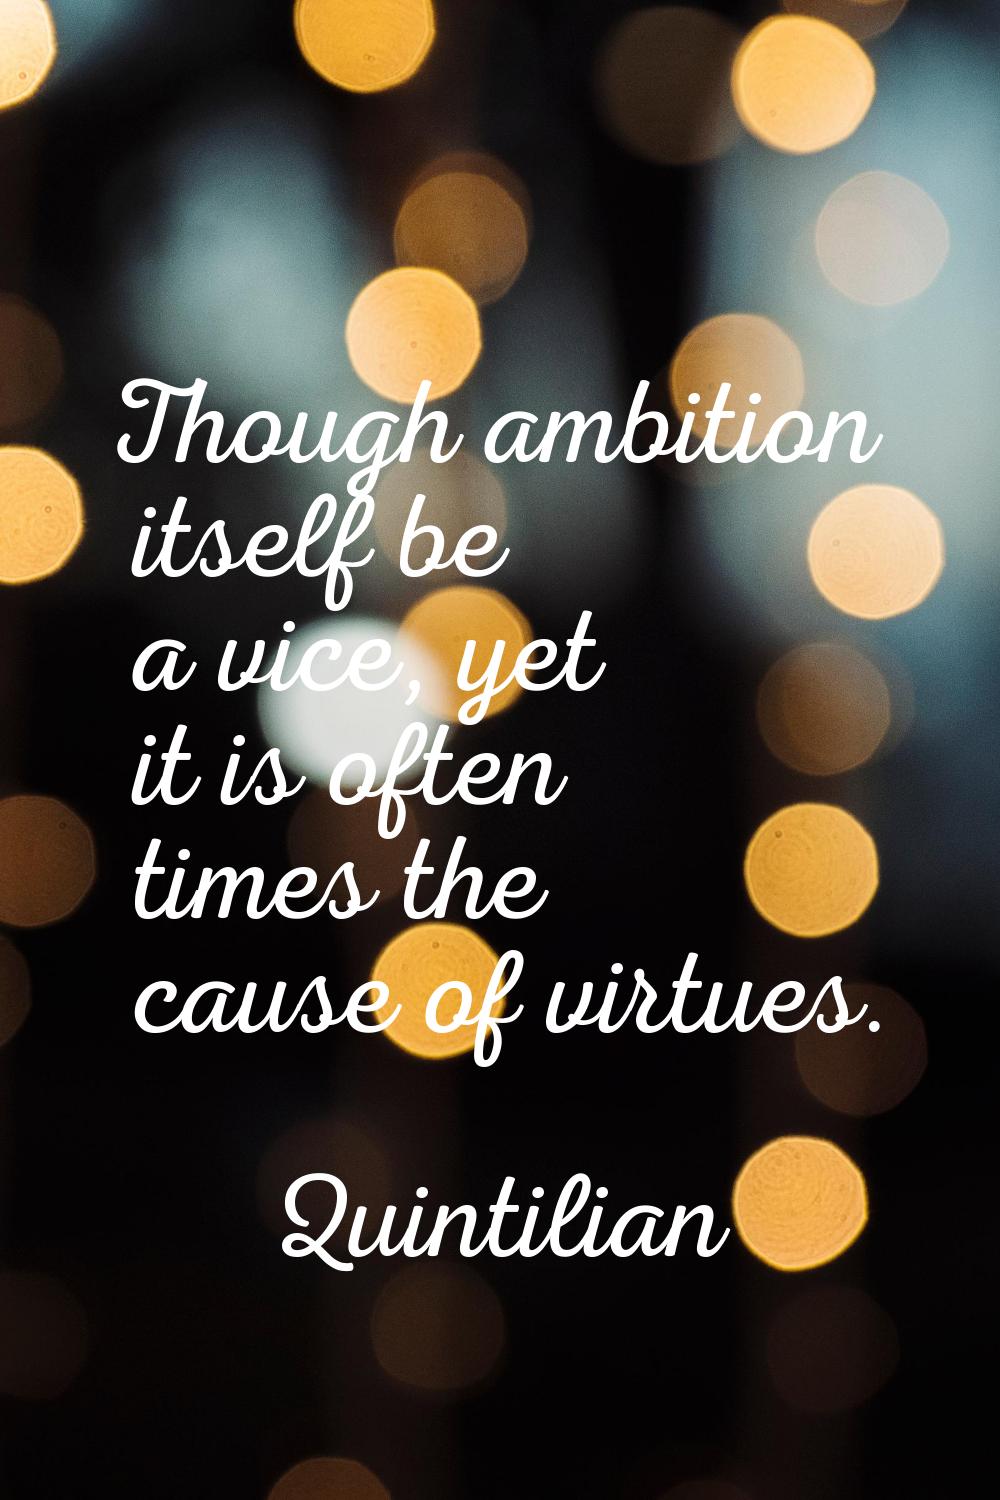 Though ambition itself be a vice, yet it is often times the cause of virtues.